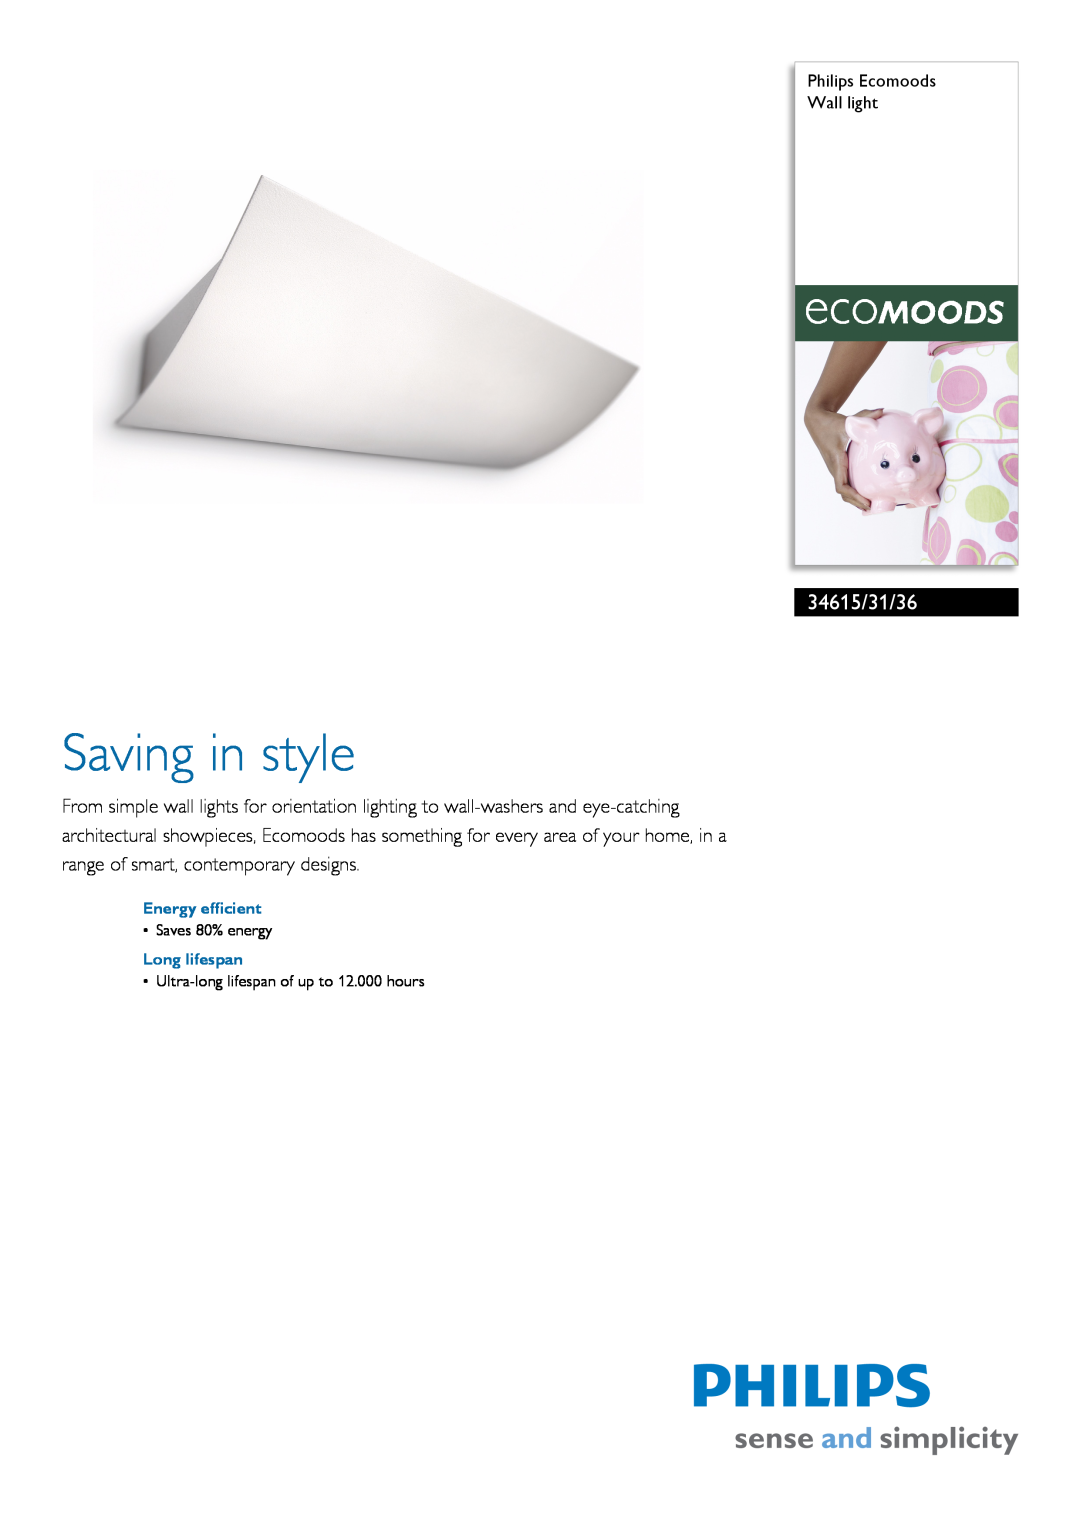 Philips 34615/31/36 manual Philips Ecomoods Wall light, Energy efficient, Long lifespan, Saving in style, Saves 80% energy 